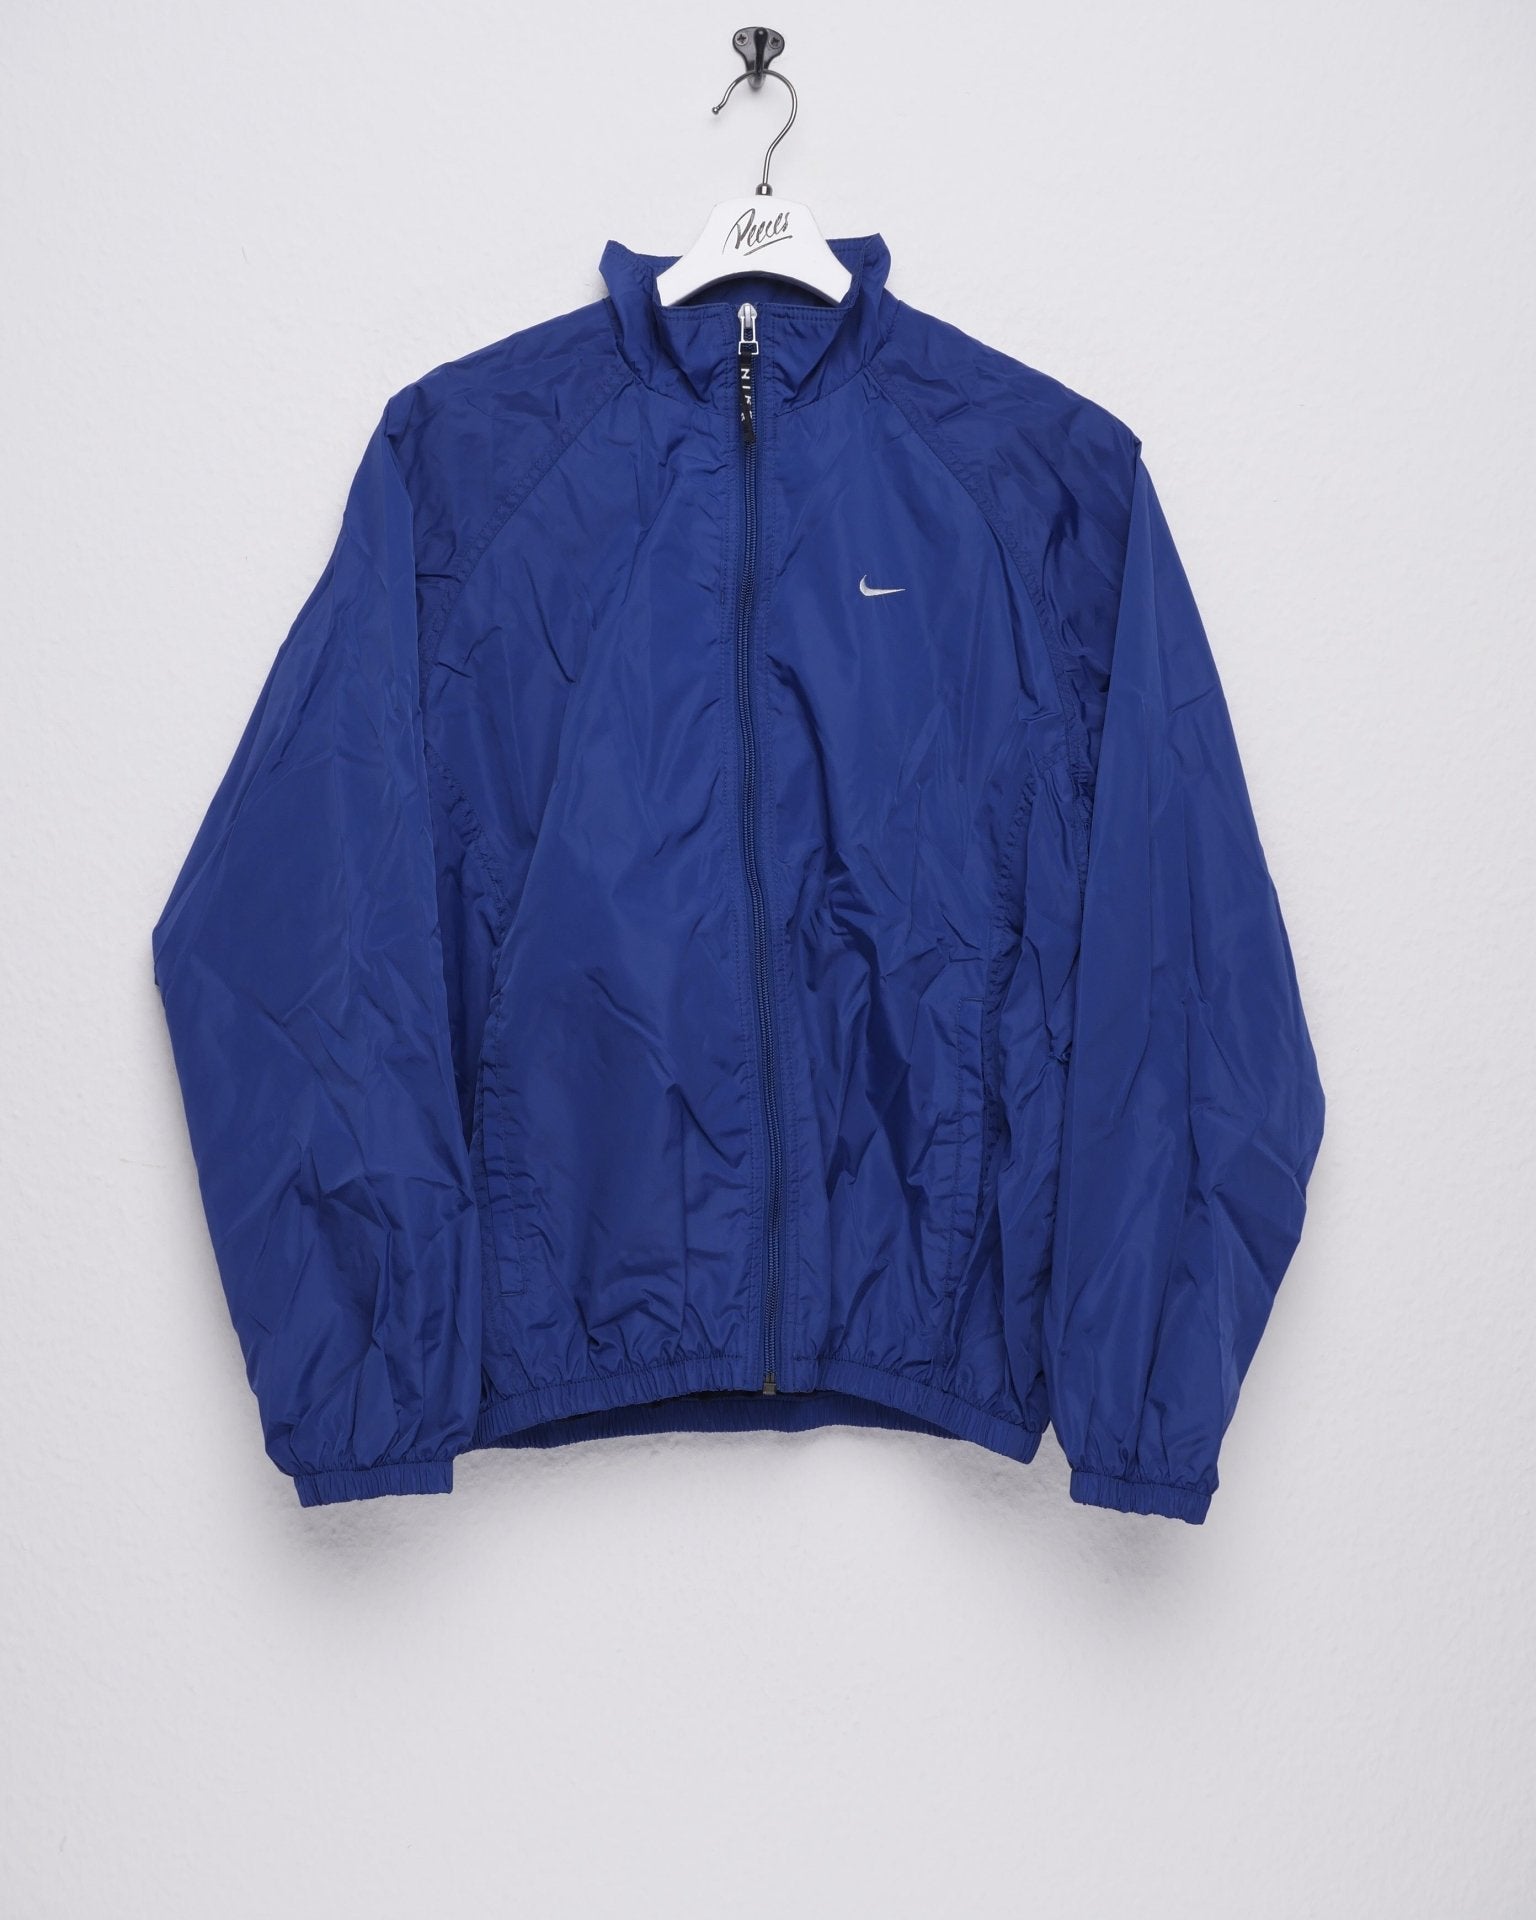 nike Red Tag embroidered Swoosh navy Track Jacket - Peeces